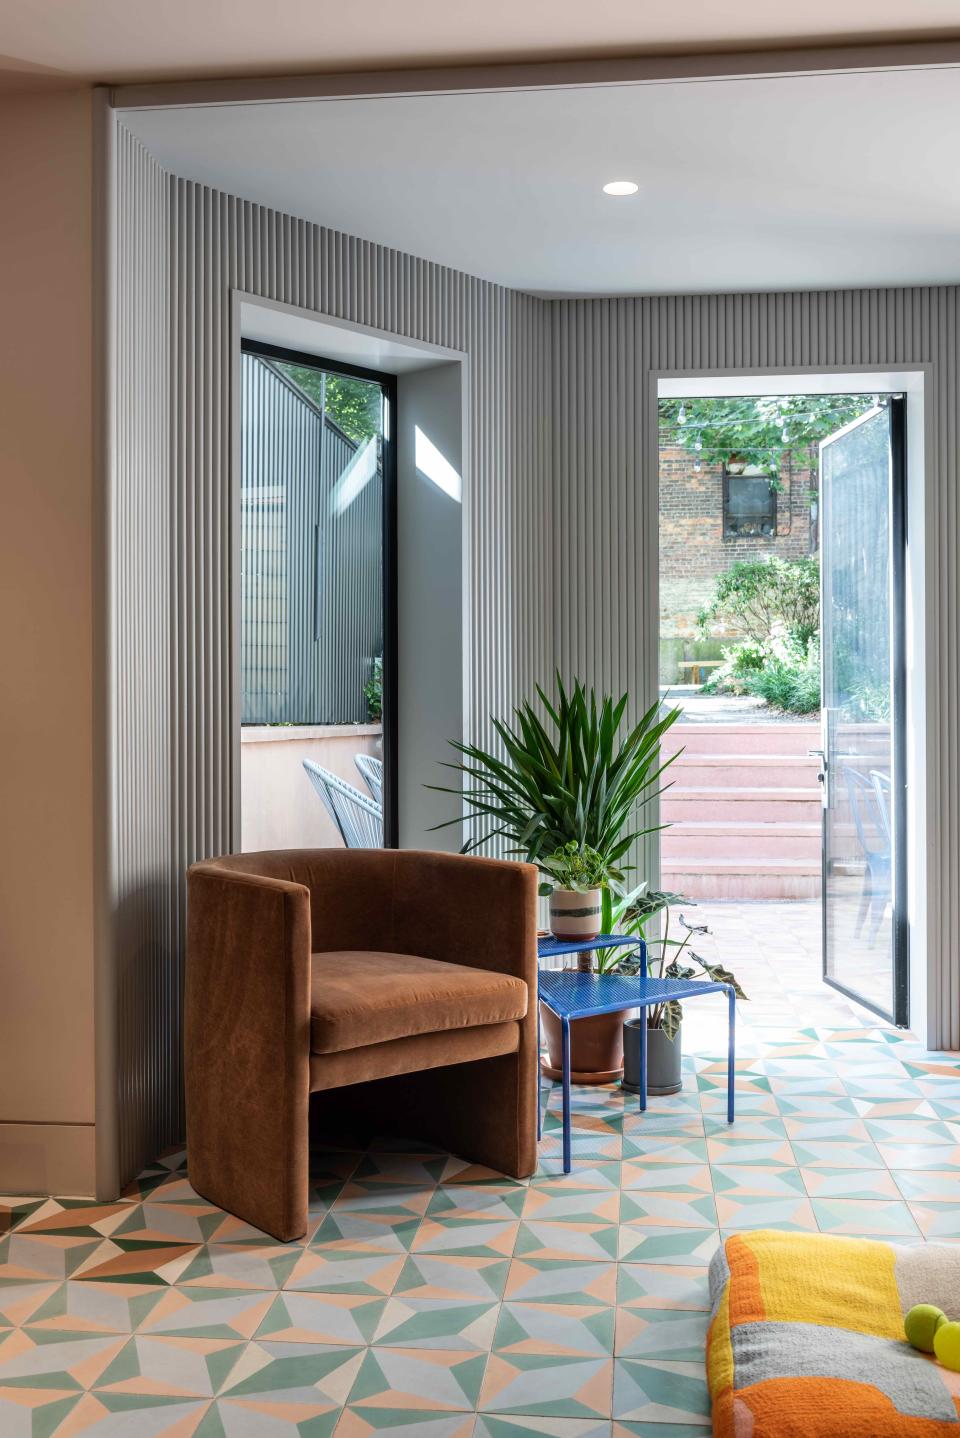 “One of the main draws of this house was the backyard—it’s unusually big for Brooklyn,” says Michael. The ceramic tile extends outdoors, leading up to a garden and lawn. An ARC Armchair by TRNK frames the back entryway.